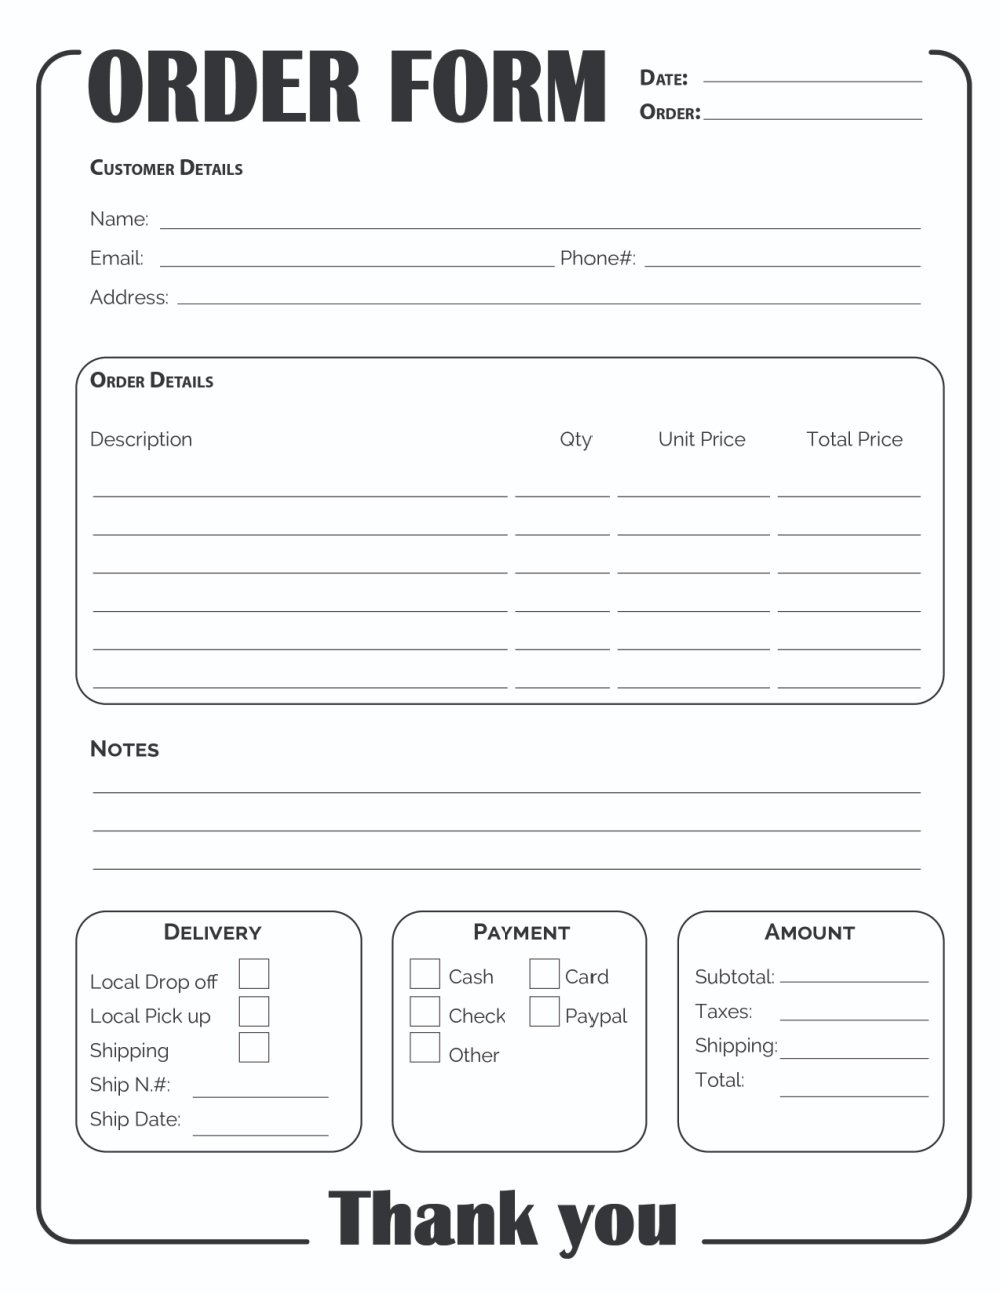 Printable Order Form Template 2 Options Freebie Finding Mom - Find Free Printable Forms Online